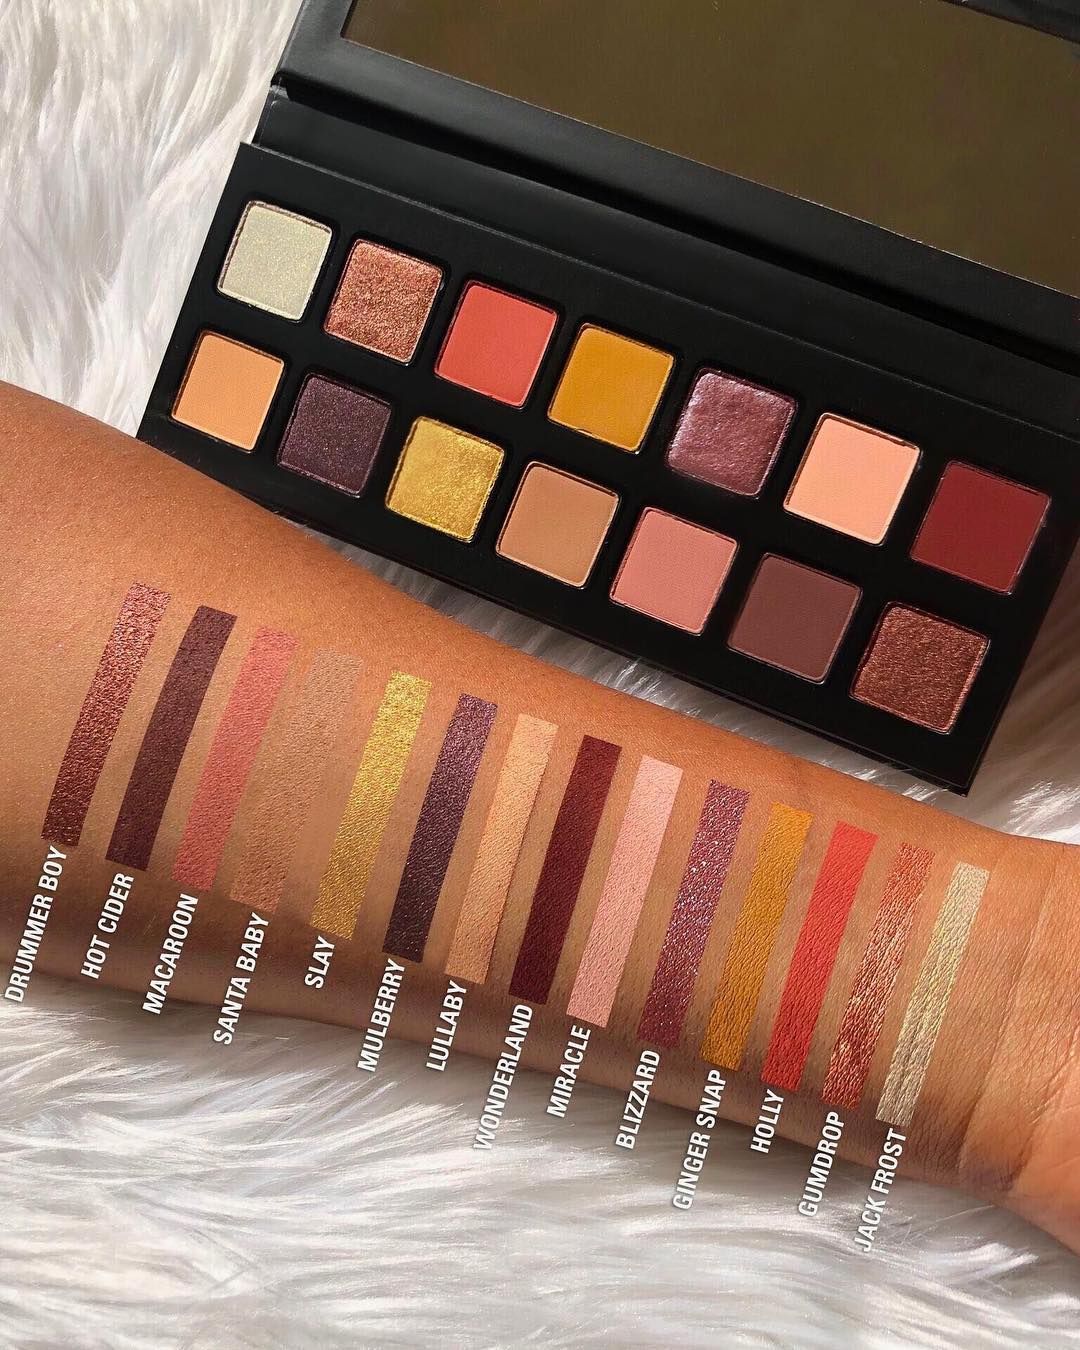 Kylie Cosmetics - The nice palette